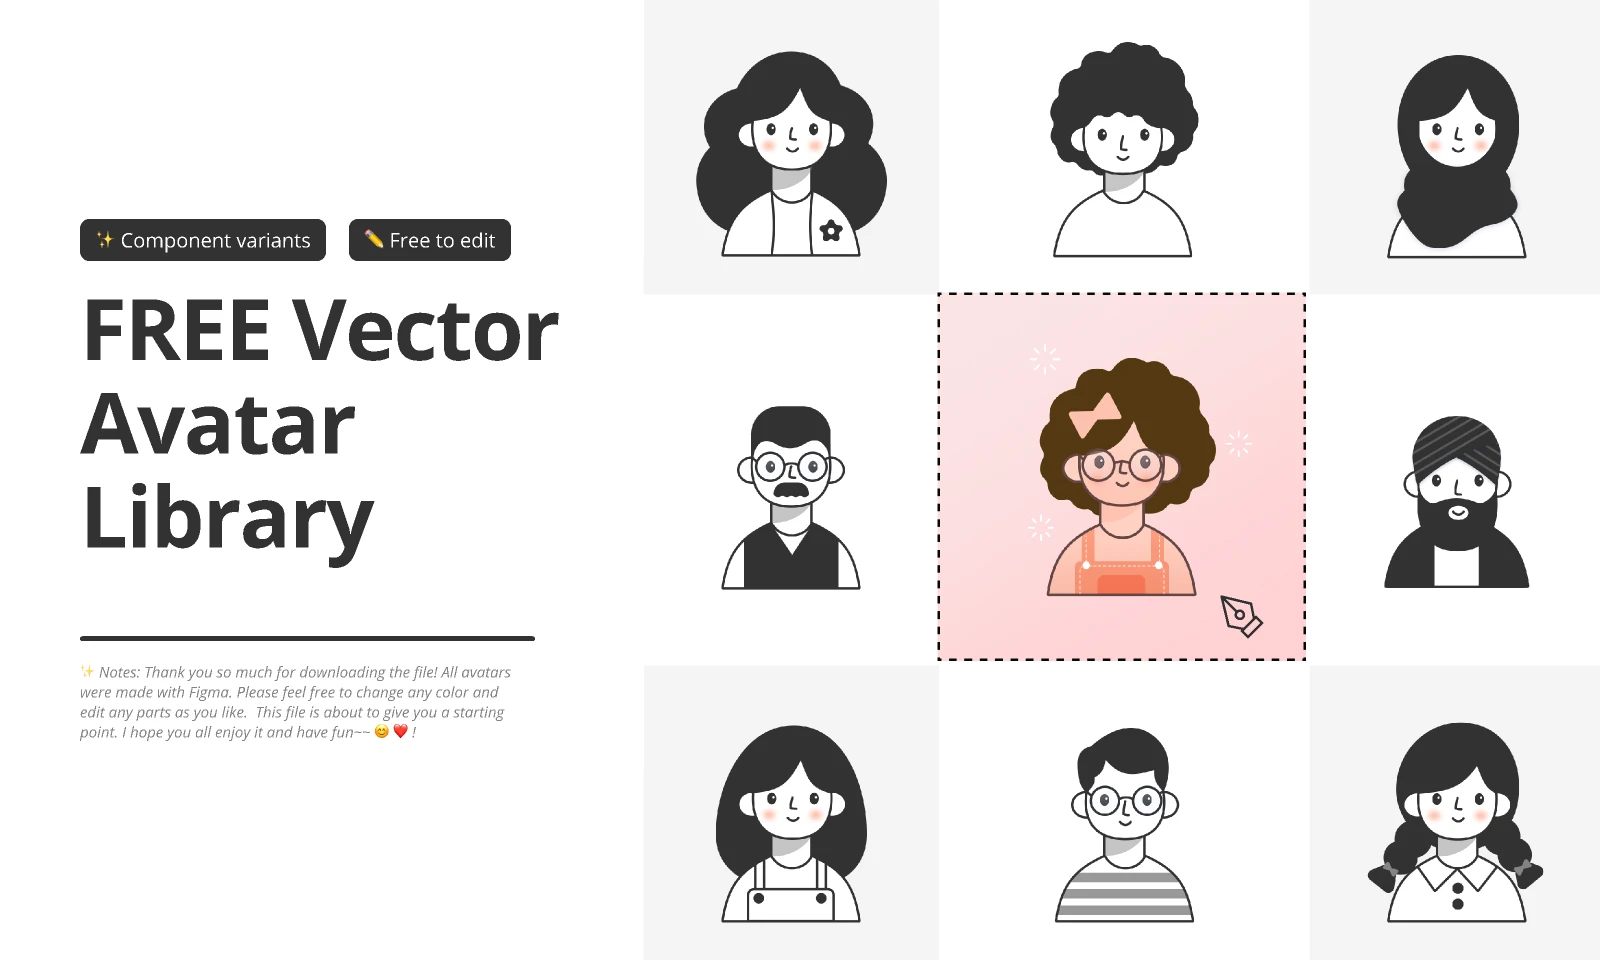 Free vector avatars library for Figma and Adobe XD